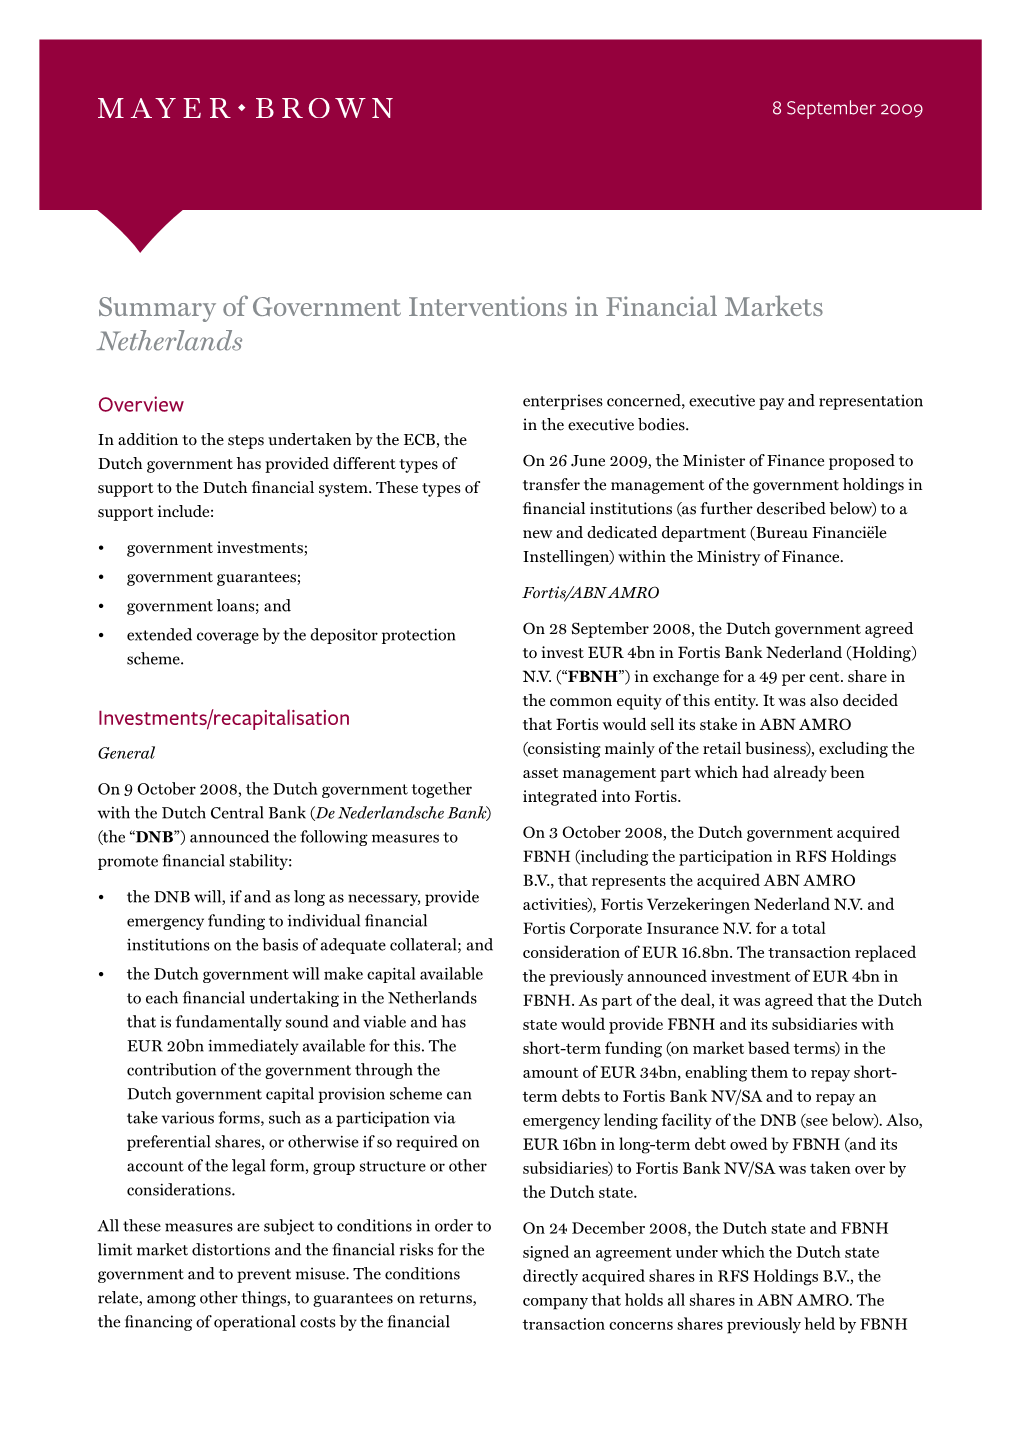 Summary of Government Interventions in Financial Markets Netherlands